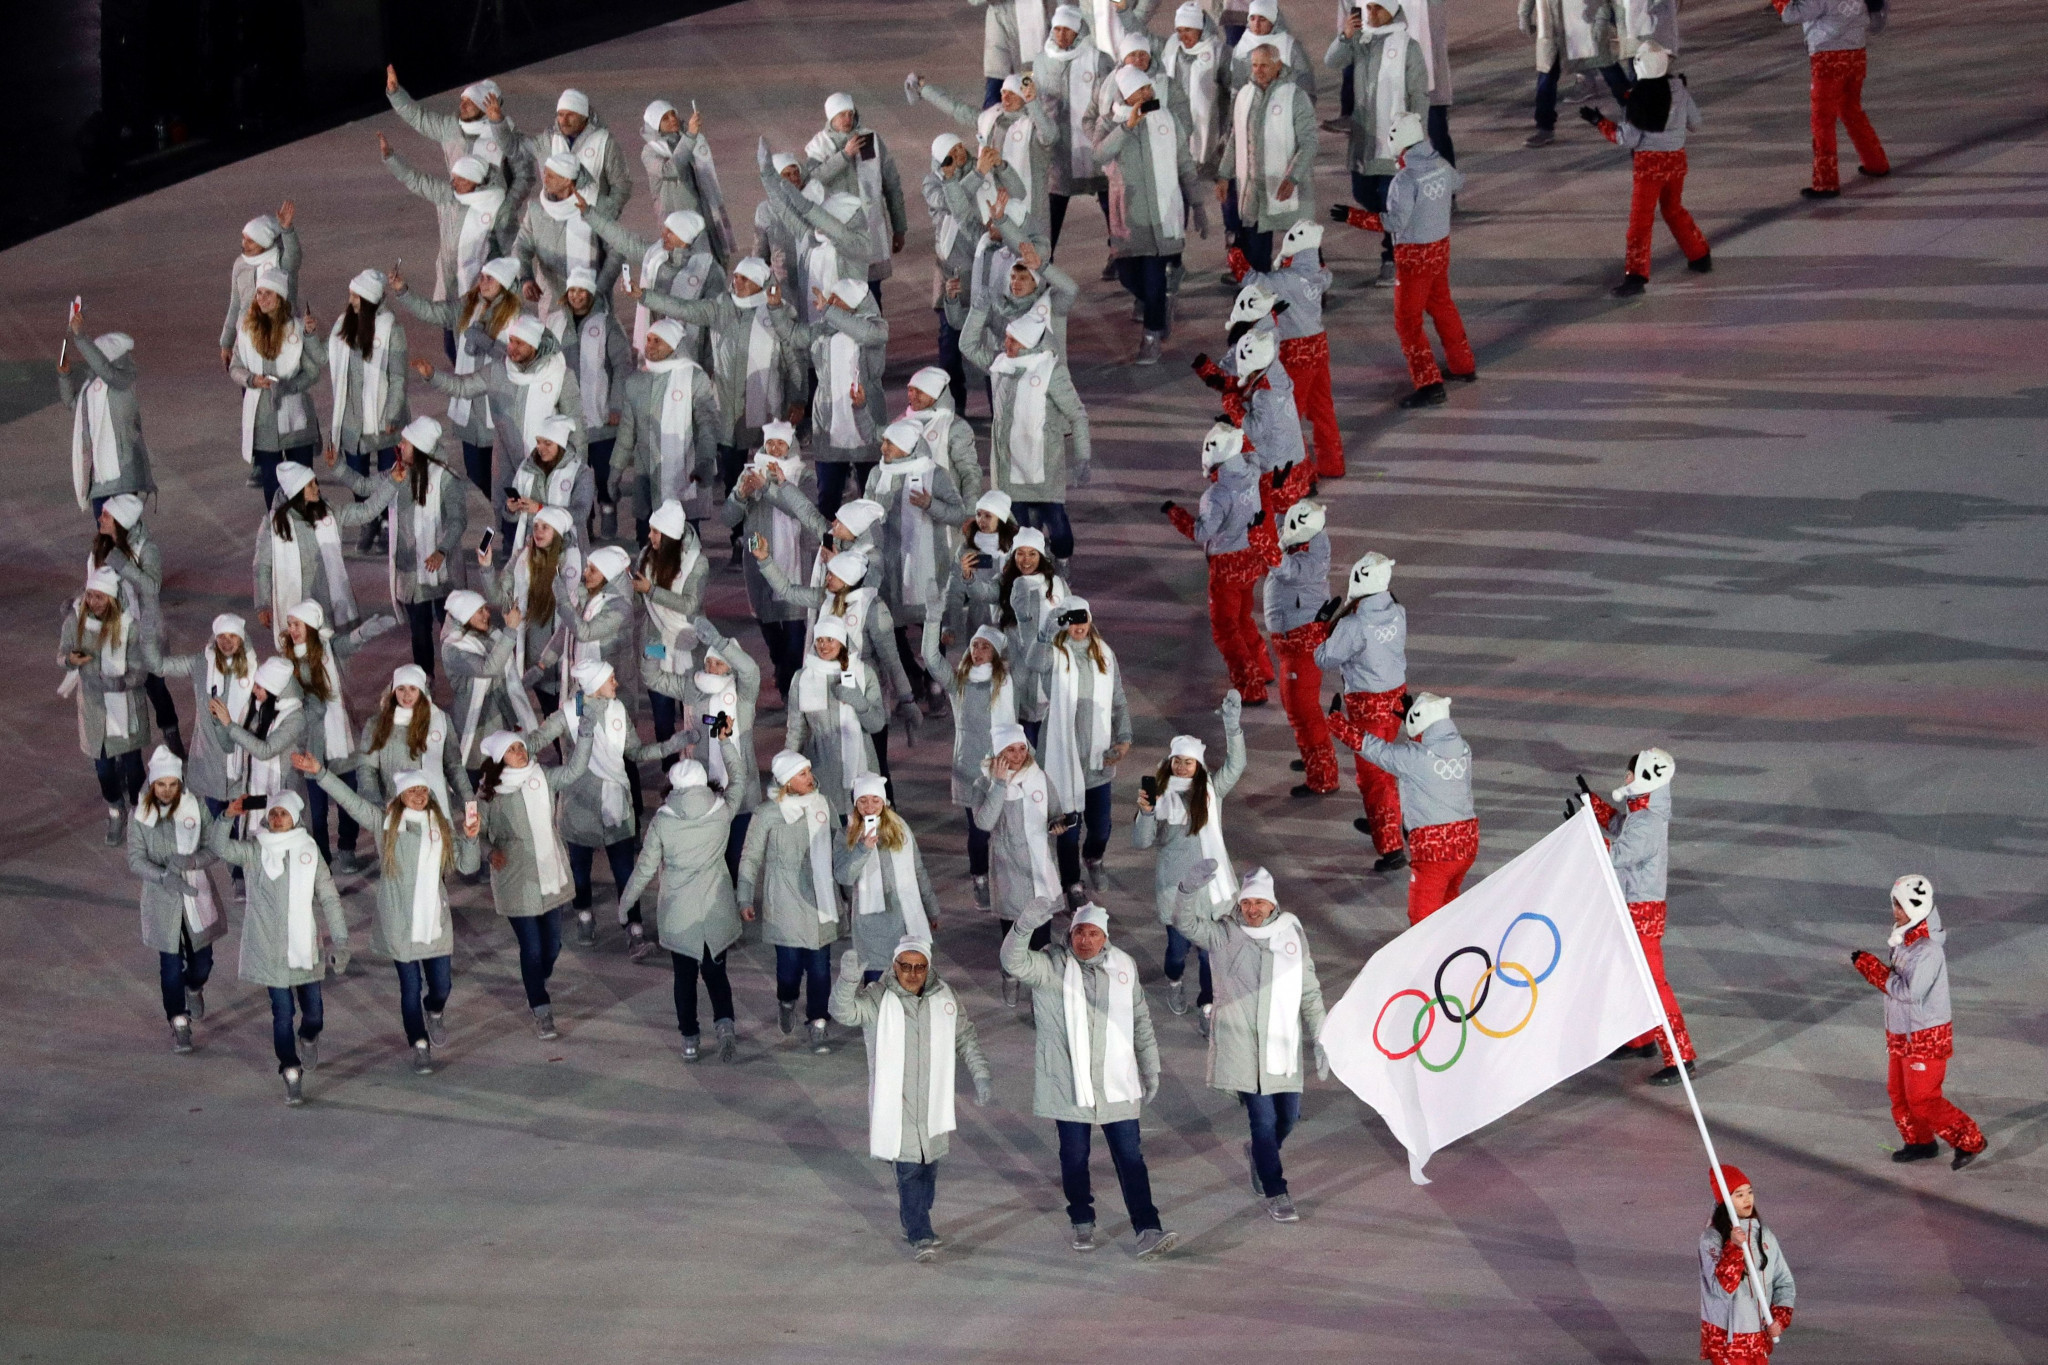 Russian athletes participated neutrally at the Opening Ceremony but are still hoping for the suspension to be lifted before the Closing Ceremony ©Getty Images